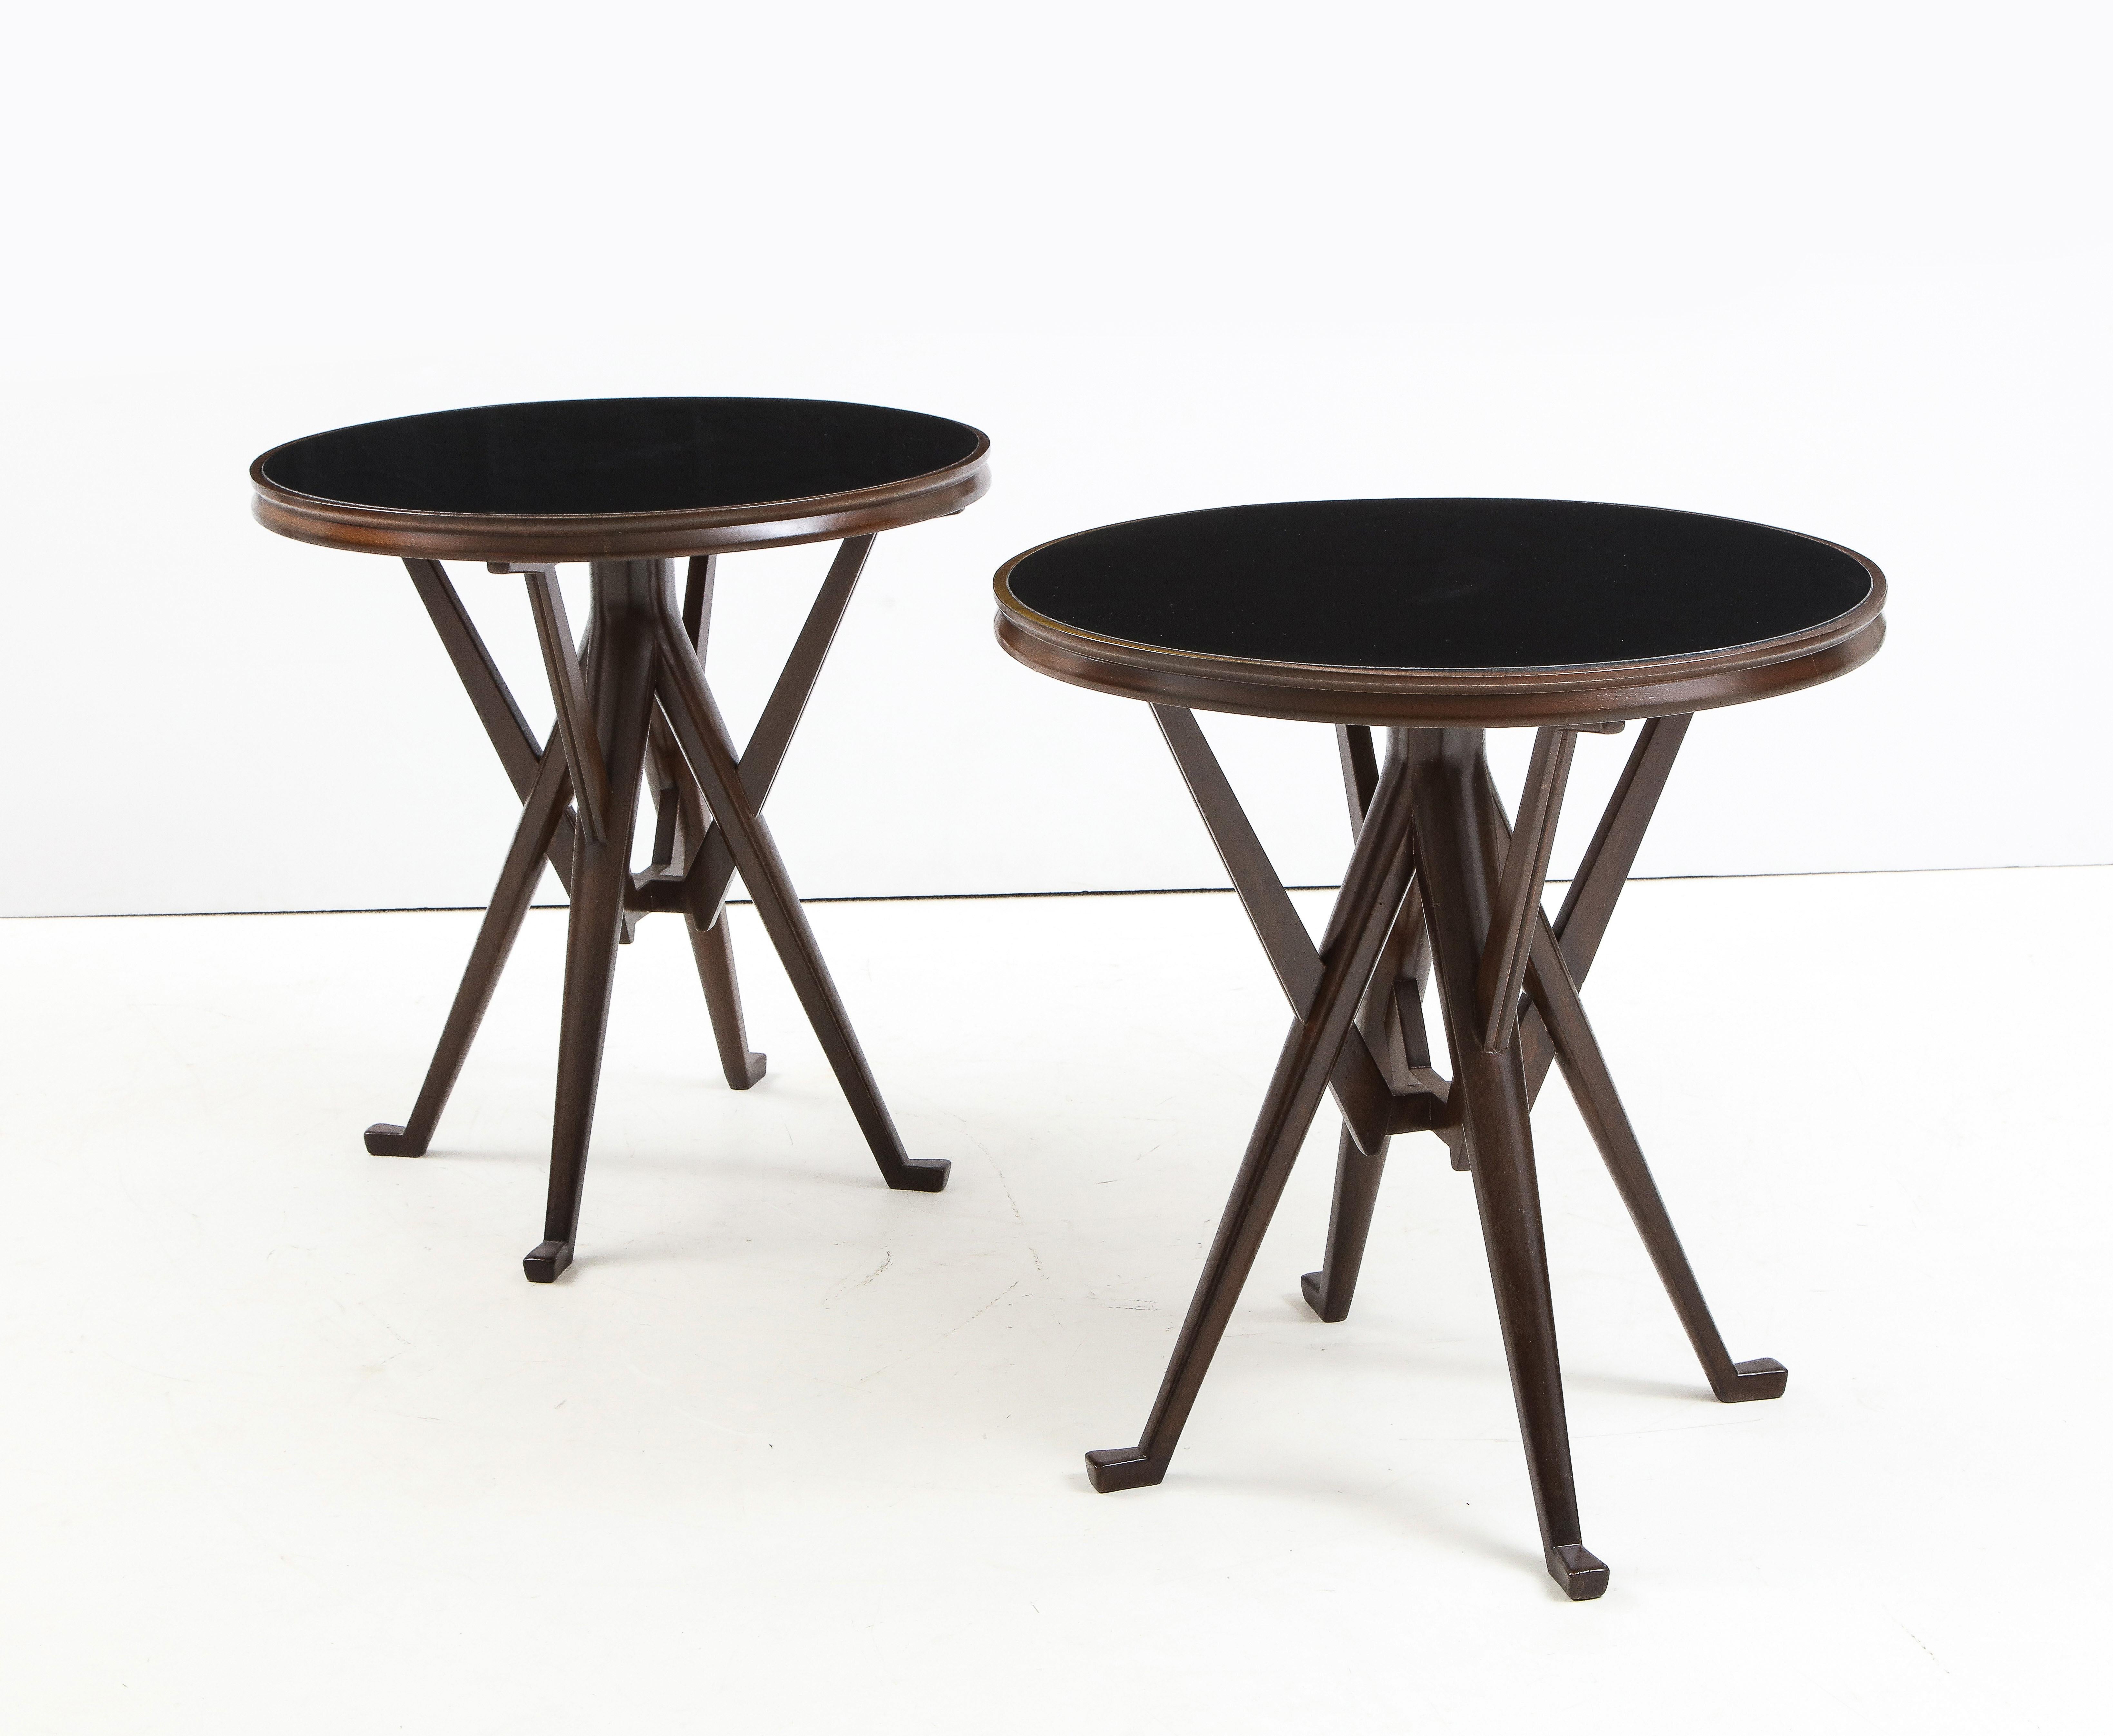 A pair of sculptural Italian mid-century dark brown circular side tables attributed to Ico Parisi with black painted glass inset tops resting on a solid wood frame with four legs with splayed feet, joined into a single short central support